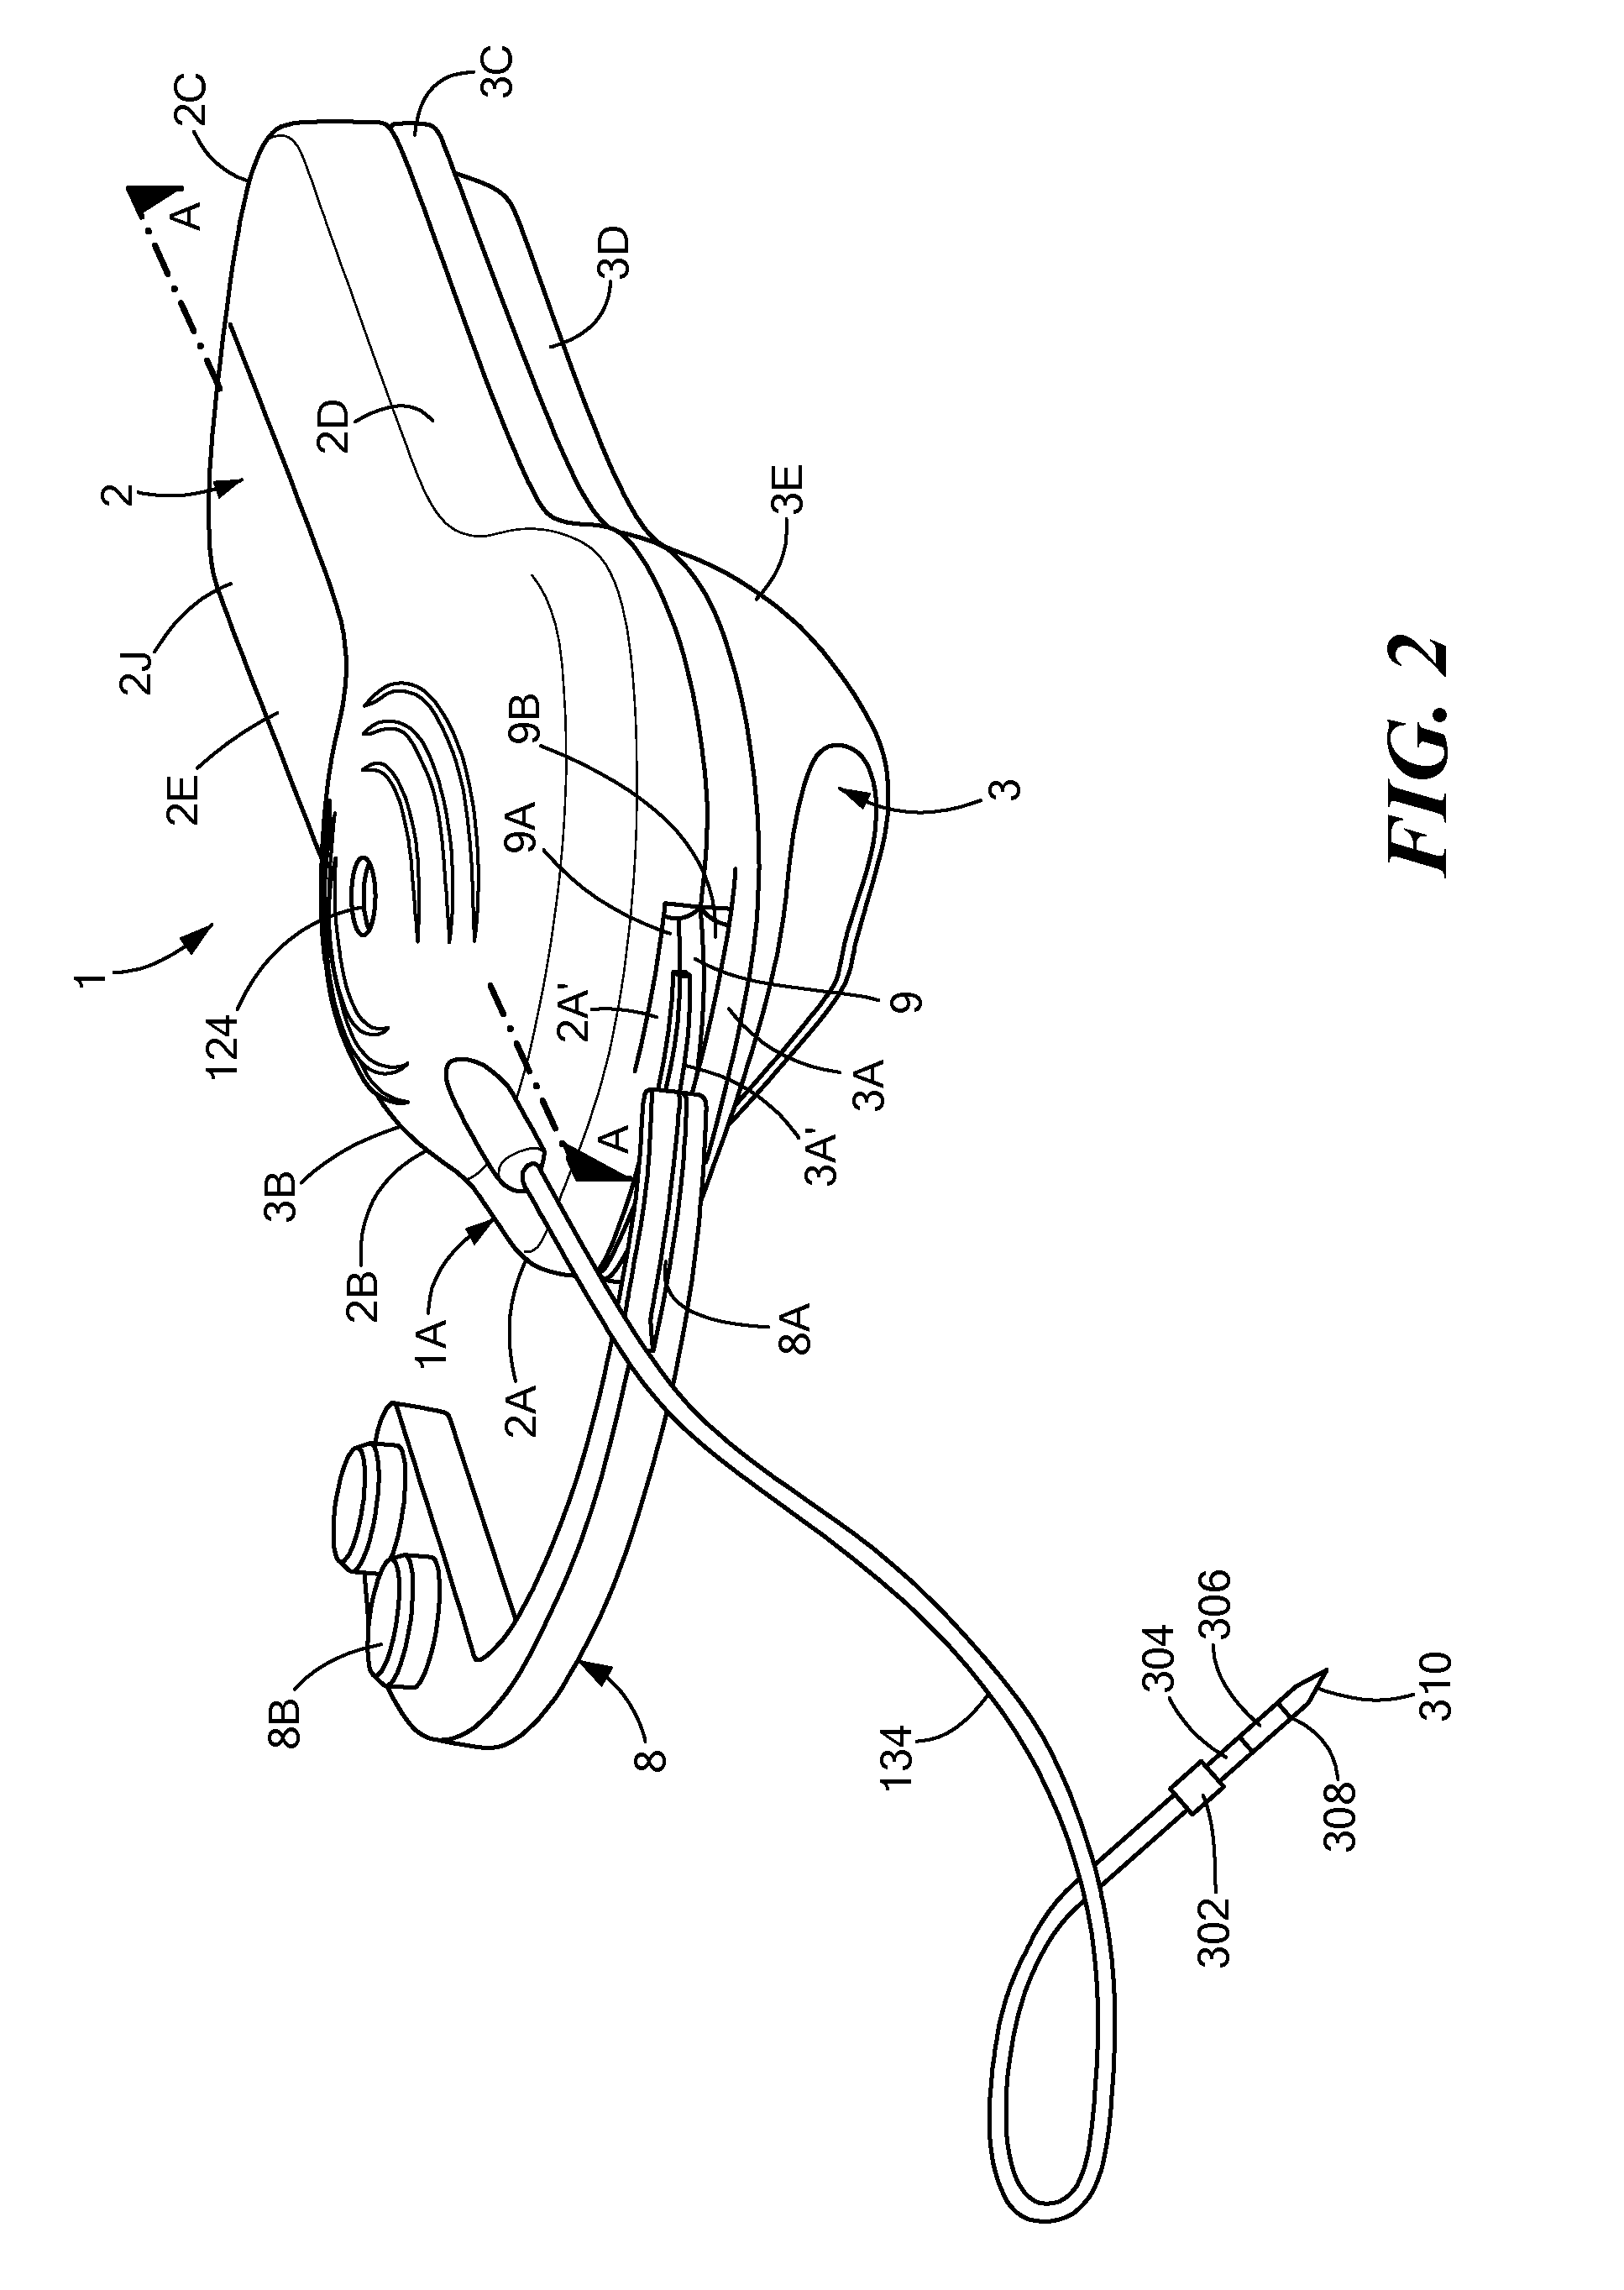 System and method for detecting a breach of an electronic article surveillance tag